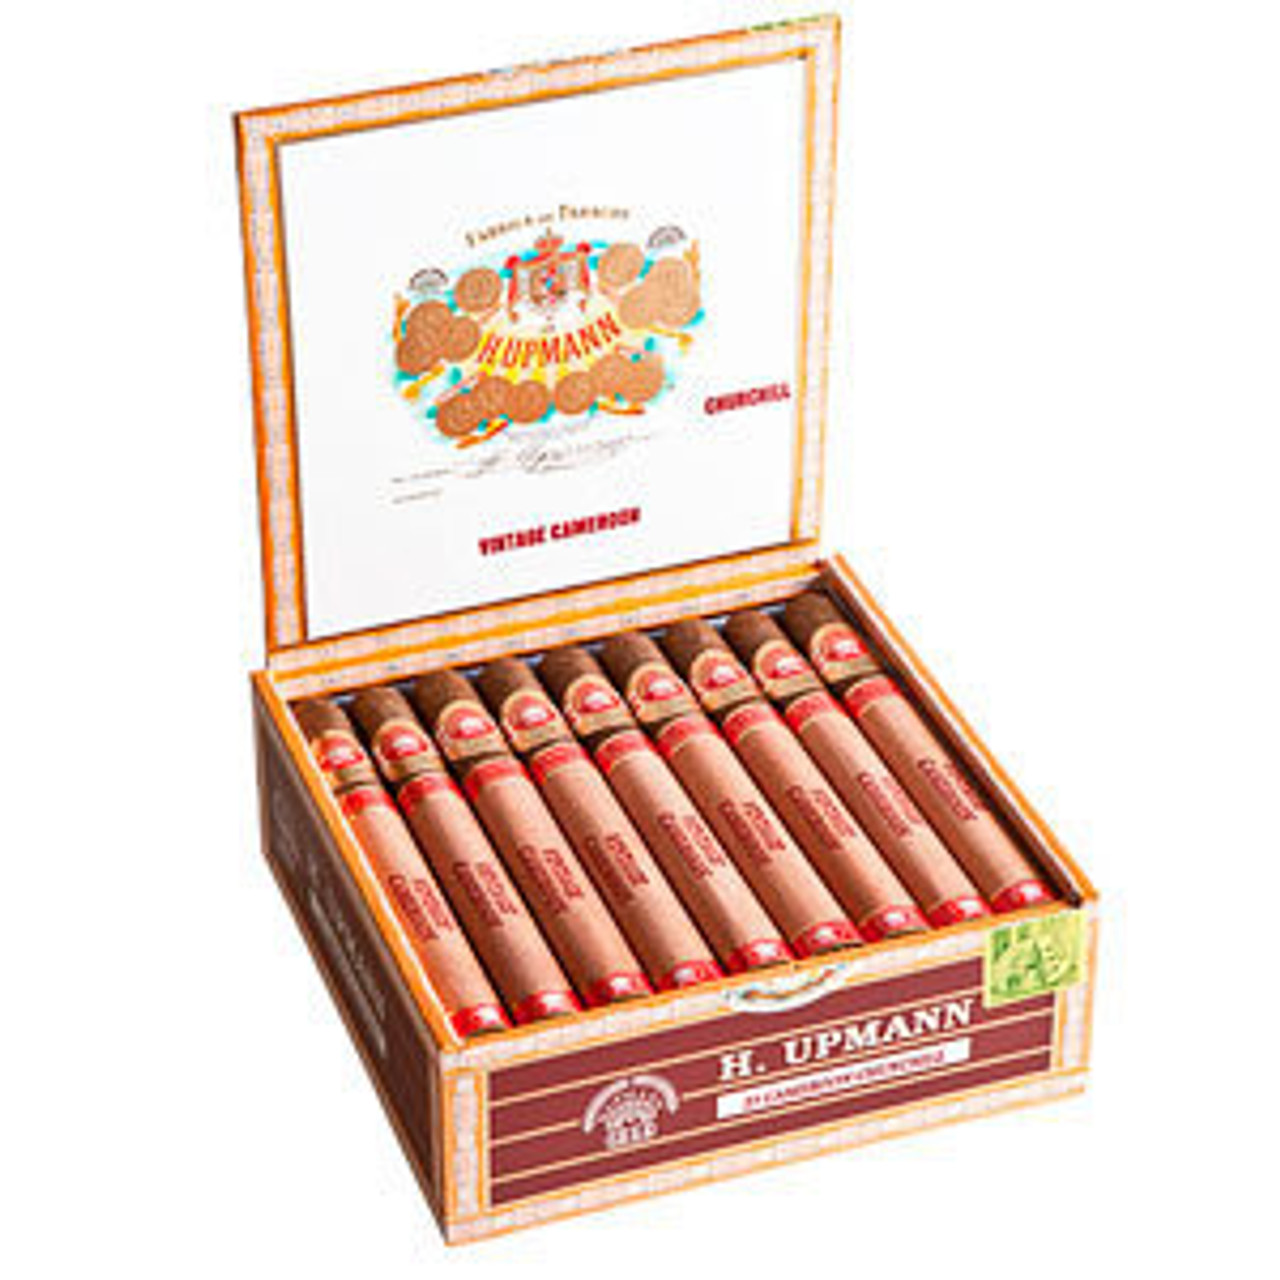 H. Upmann Vintage Cameroon Lonsdale Cigars - 6.62 x 44 (Box of 25) *Box